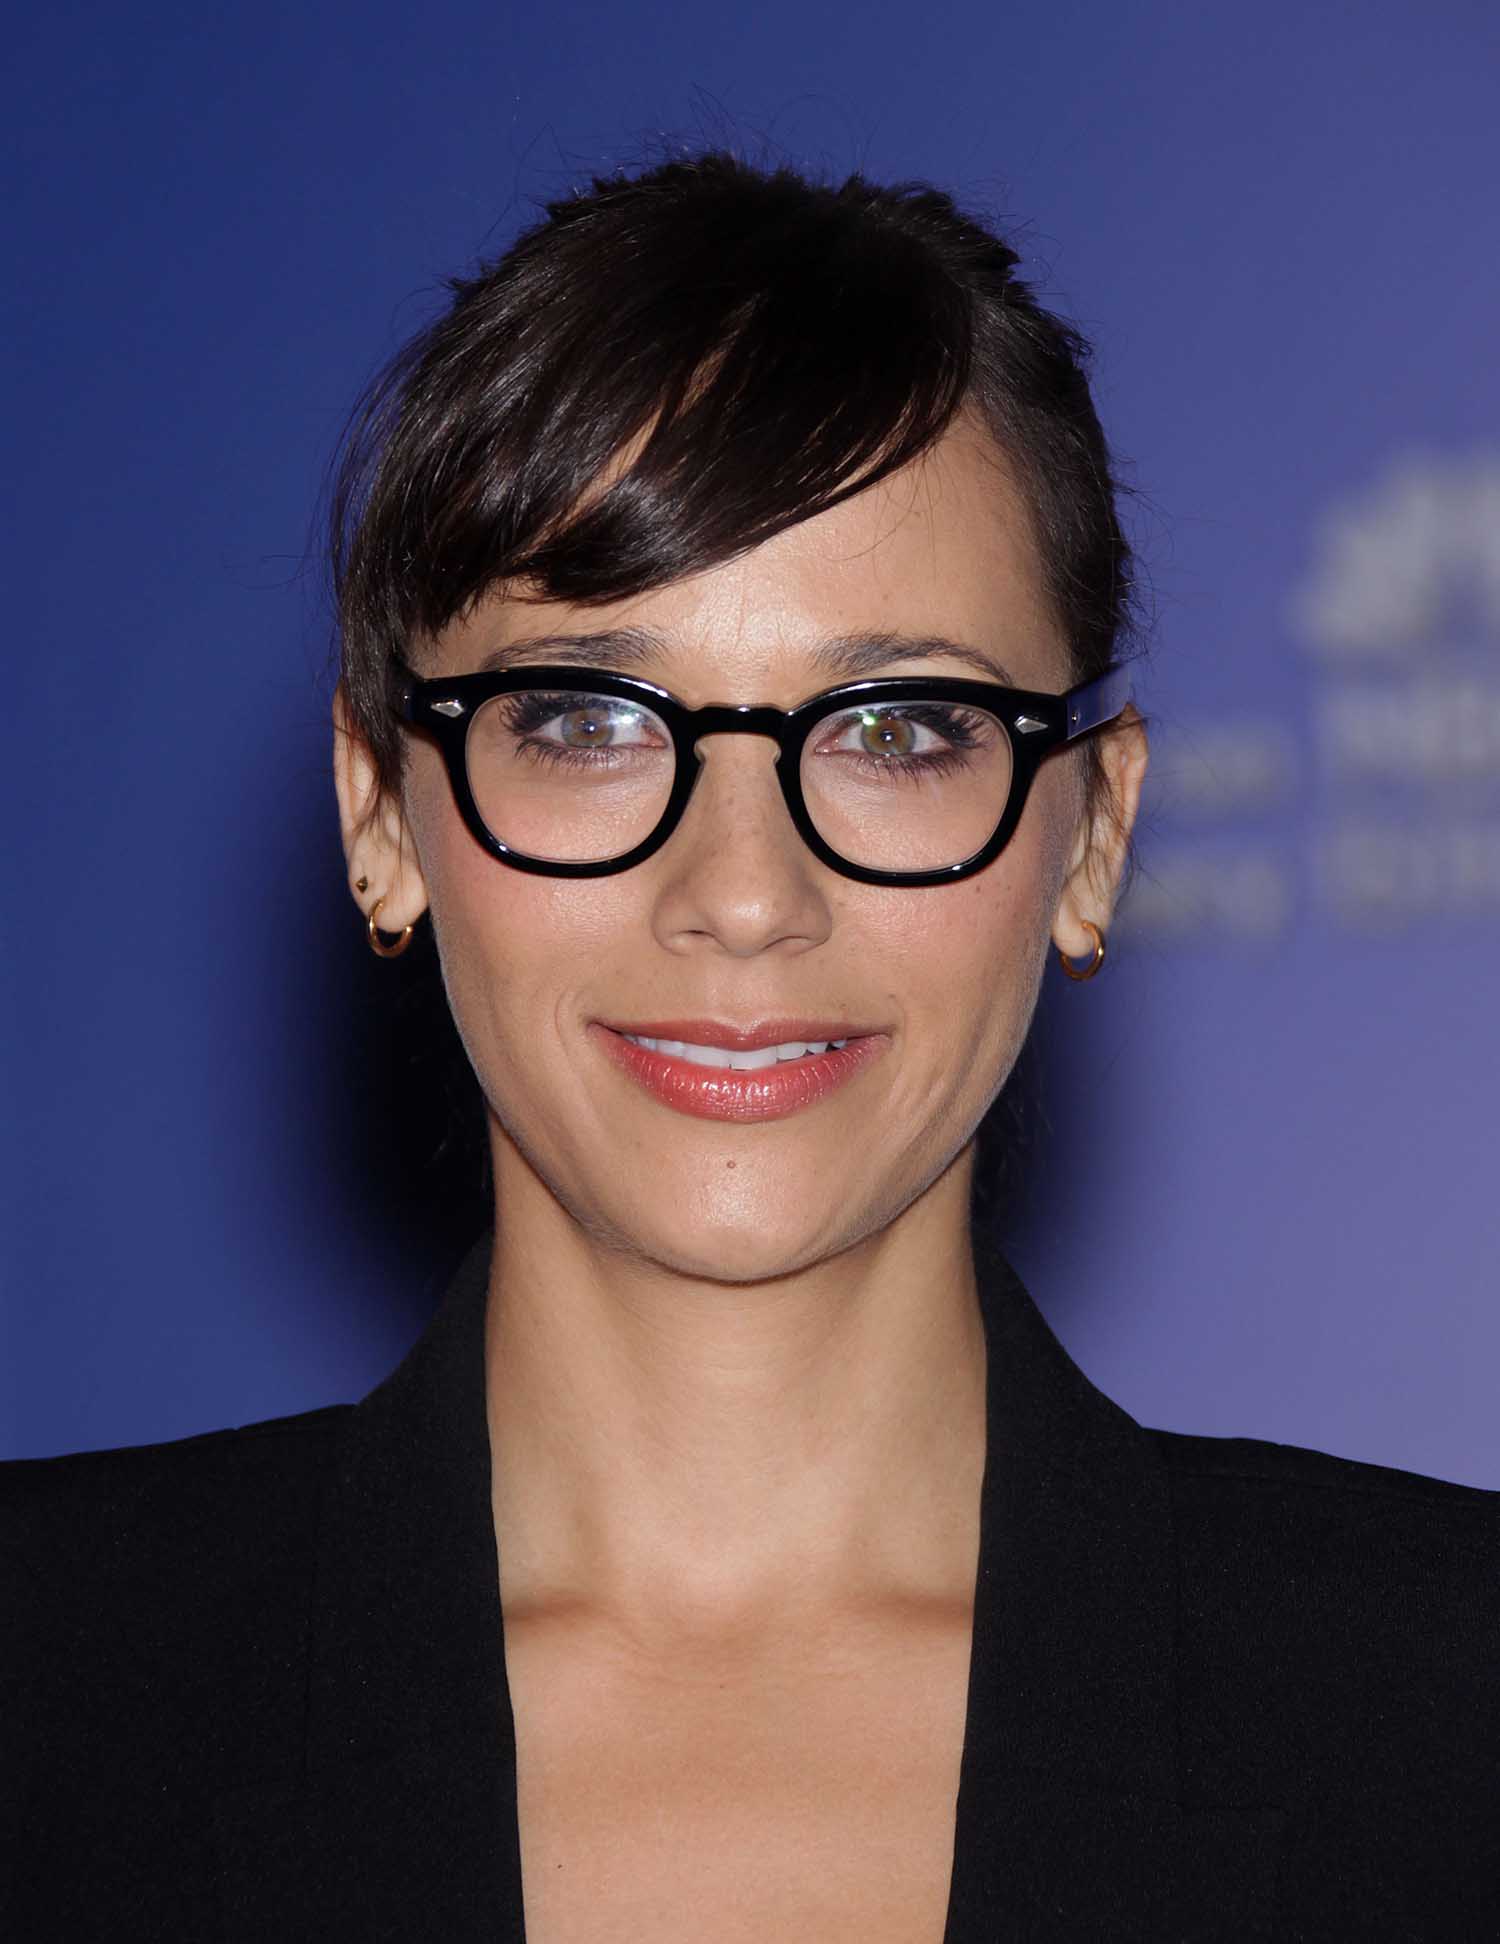 https://www.beautyscene.net/wp-content/uploads/2023/06/Geek-Chic-10-Examples-of-Celebrities-Who-Look-Better-in-a-Pair-of-Glasses-2.jpg